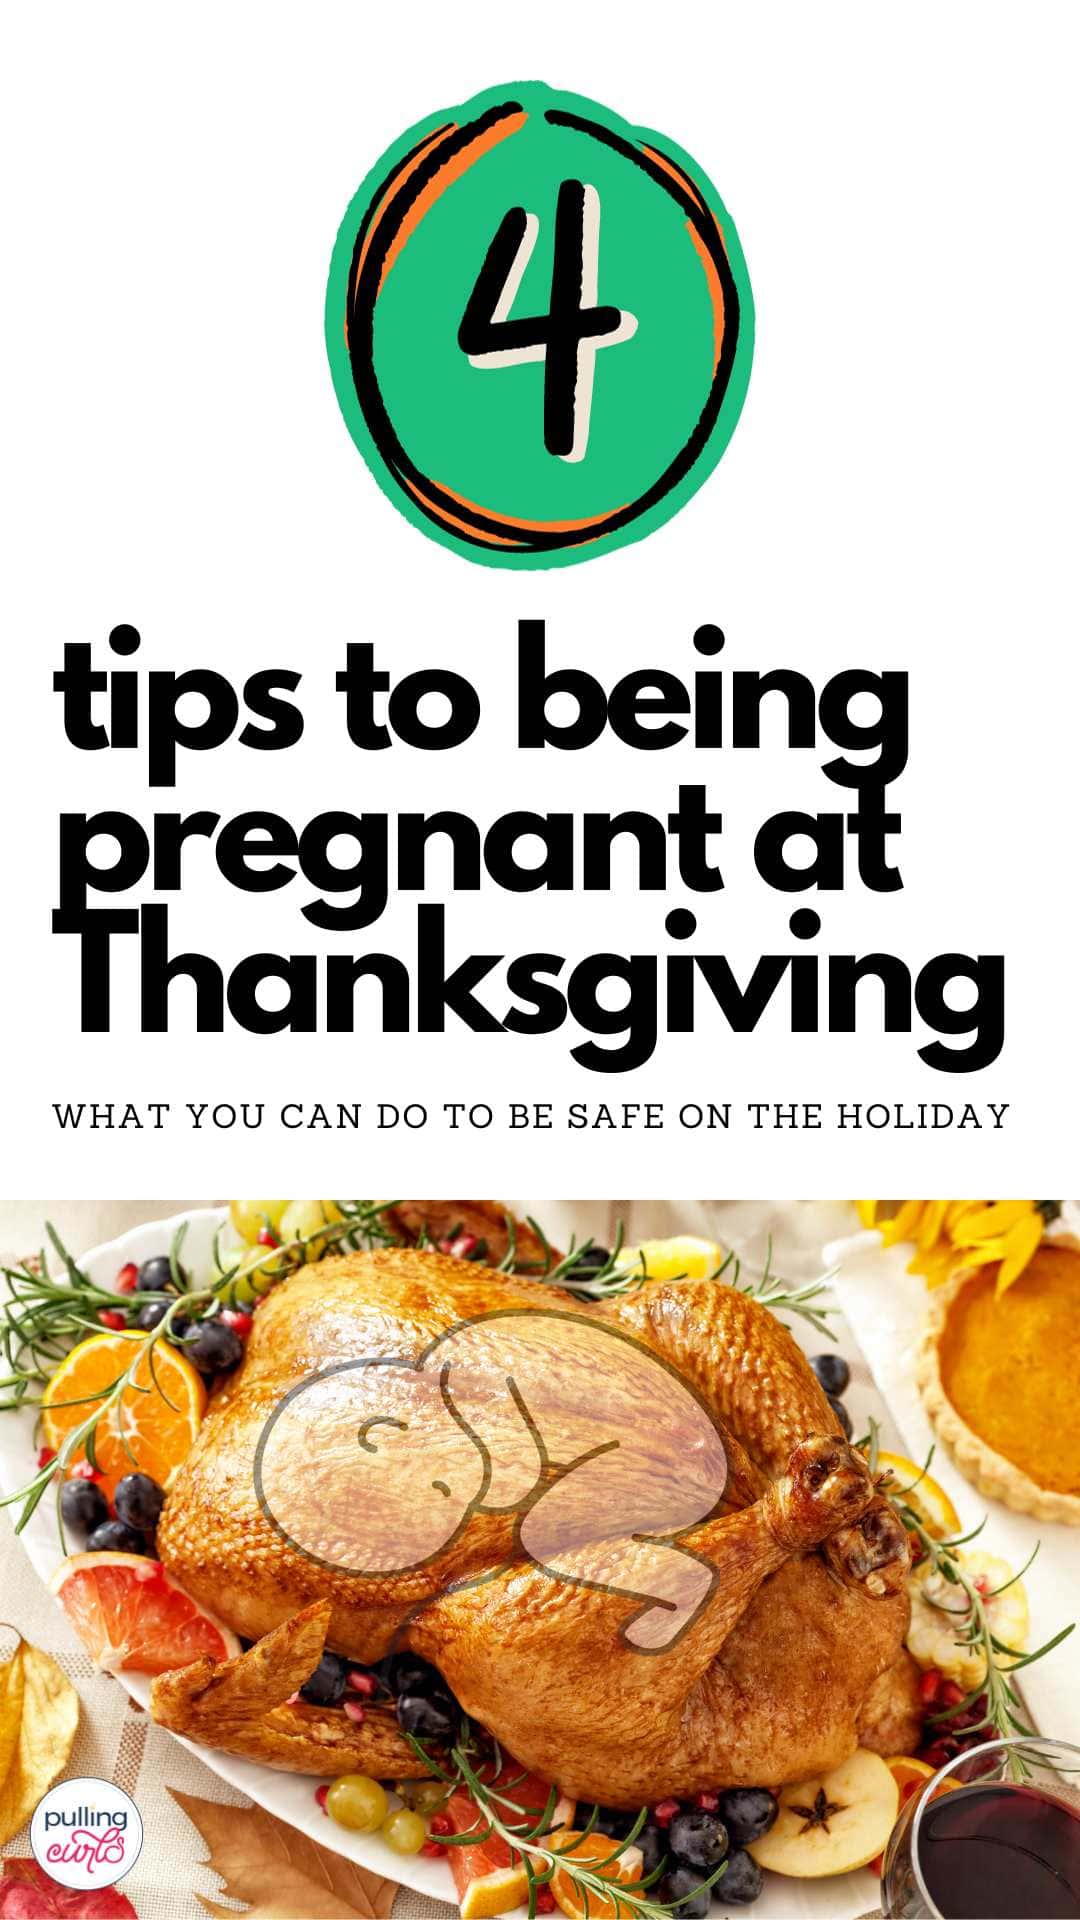 4 tips to being pregnant at Thanksgiving / picture of a turkey with a fetus super-imposed. via @pullingcurls